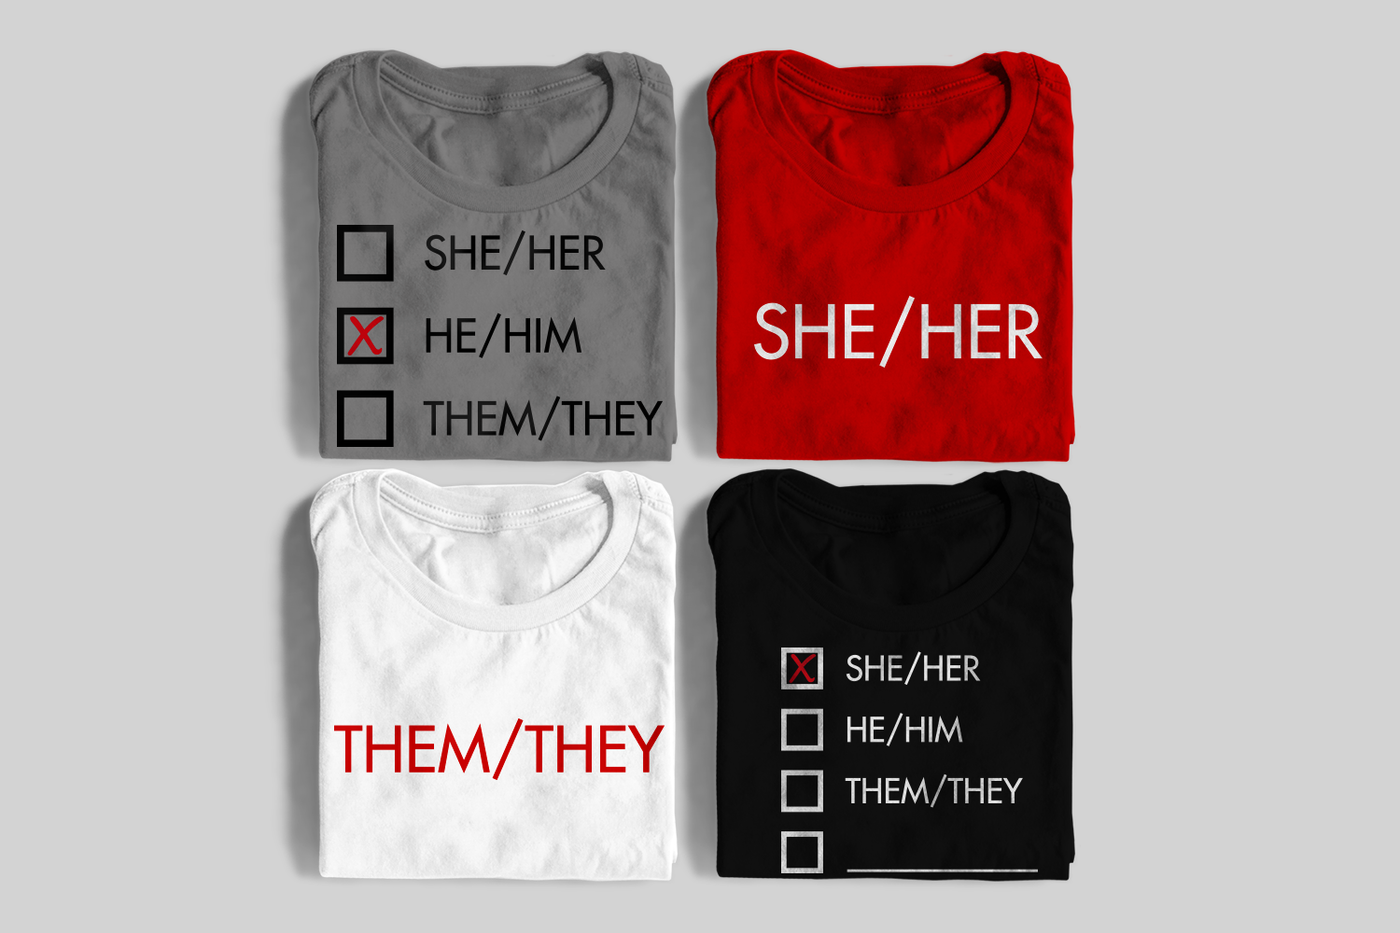 List of pronouns with check boxes and one with a blank for adding your own.